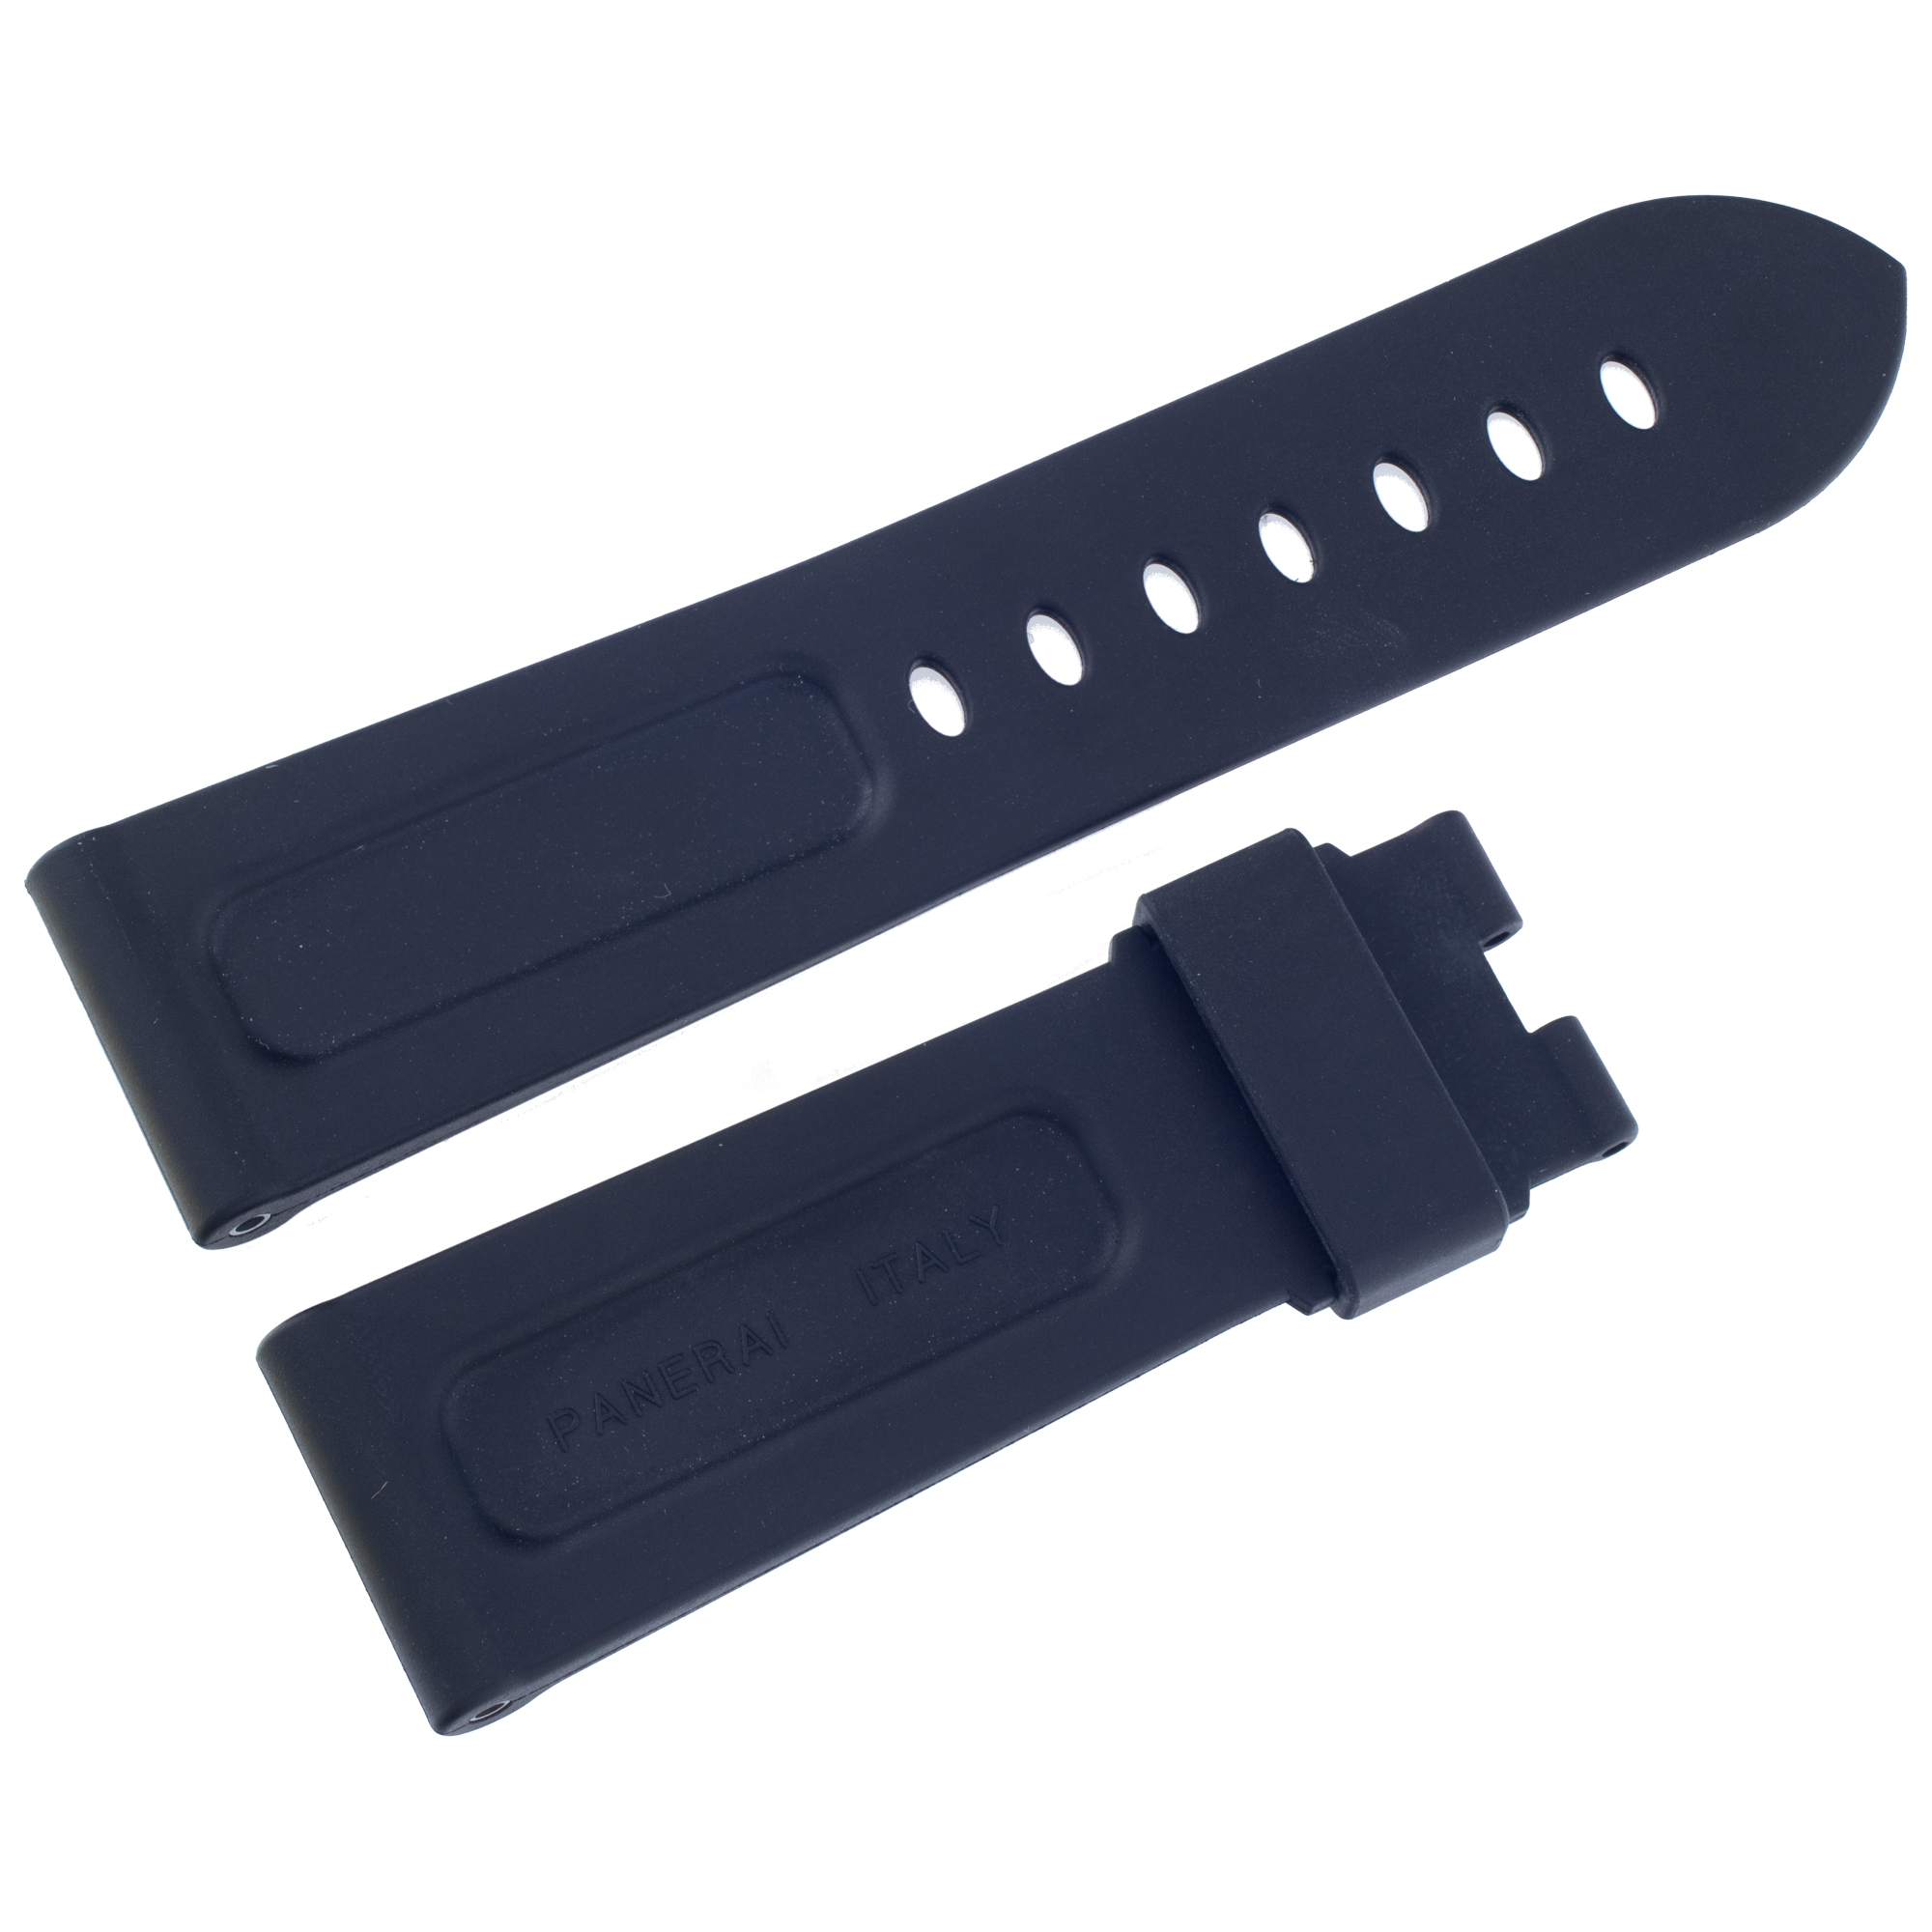 Panerai black rubber watch band (24 x 21). 24mm width by the lug end and 21 mm width by the buckle end. Length: 4.1/2" long piece and 2.75" short piece.